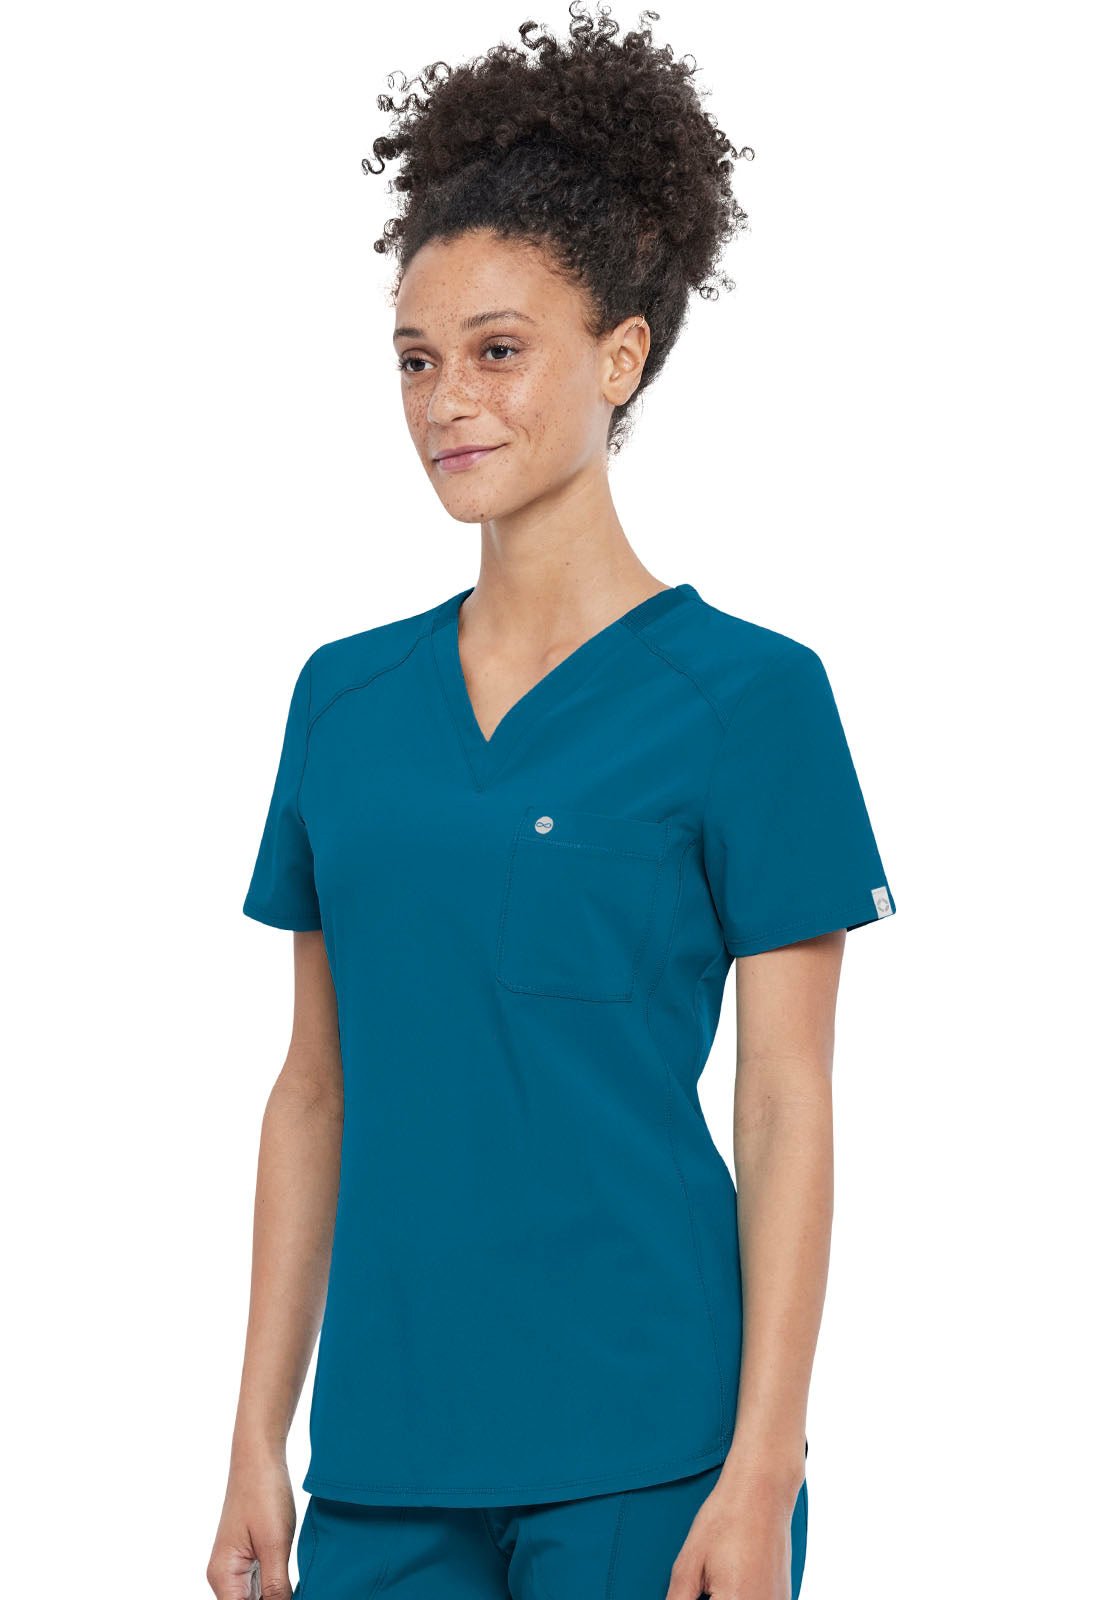 Caribbean Blue Infinity Scrubs Tuckable V-Neck Top- Left Side View